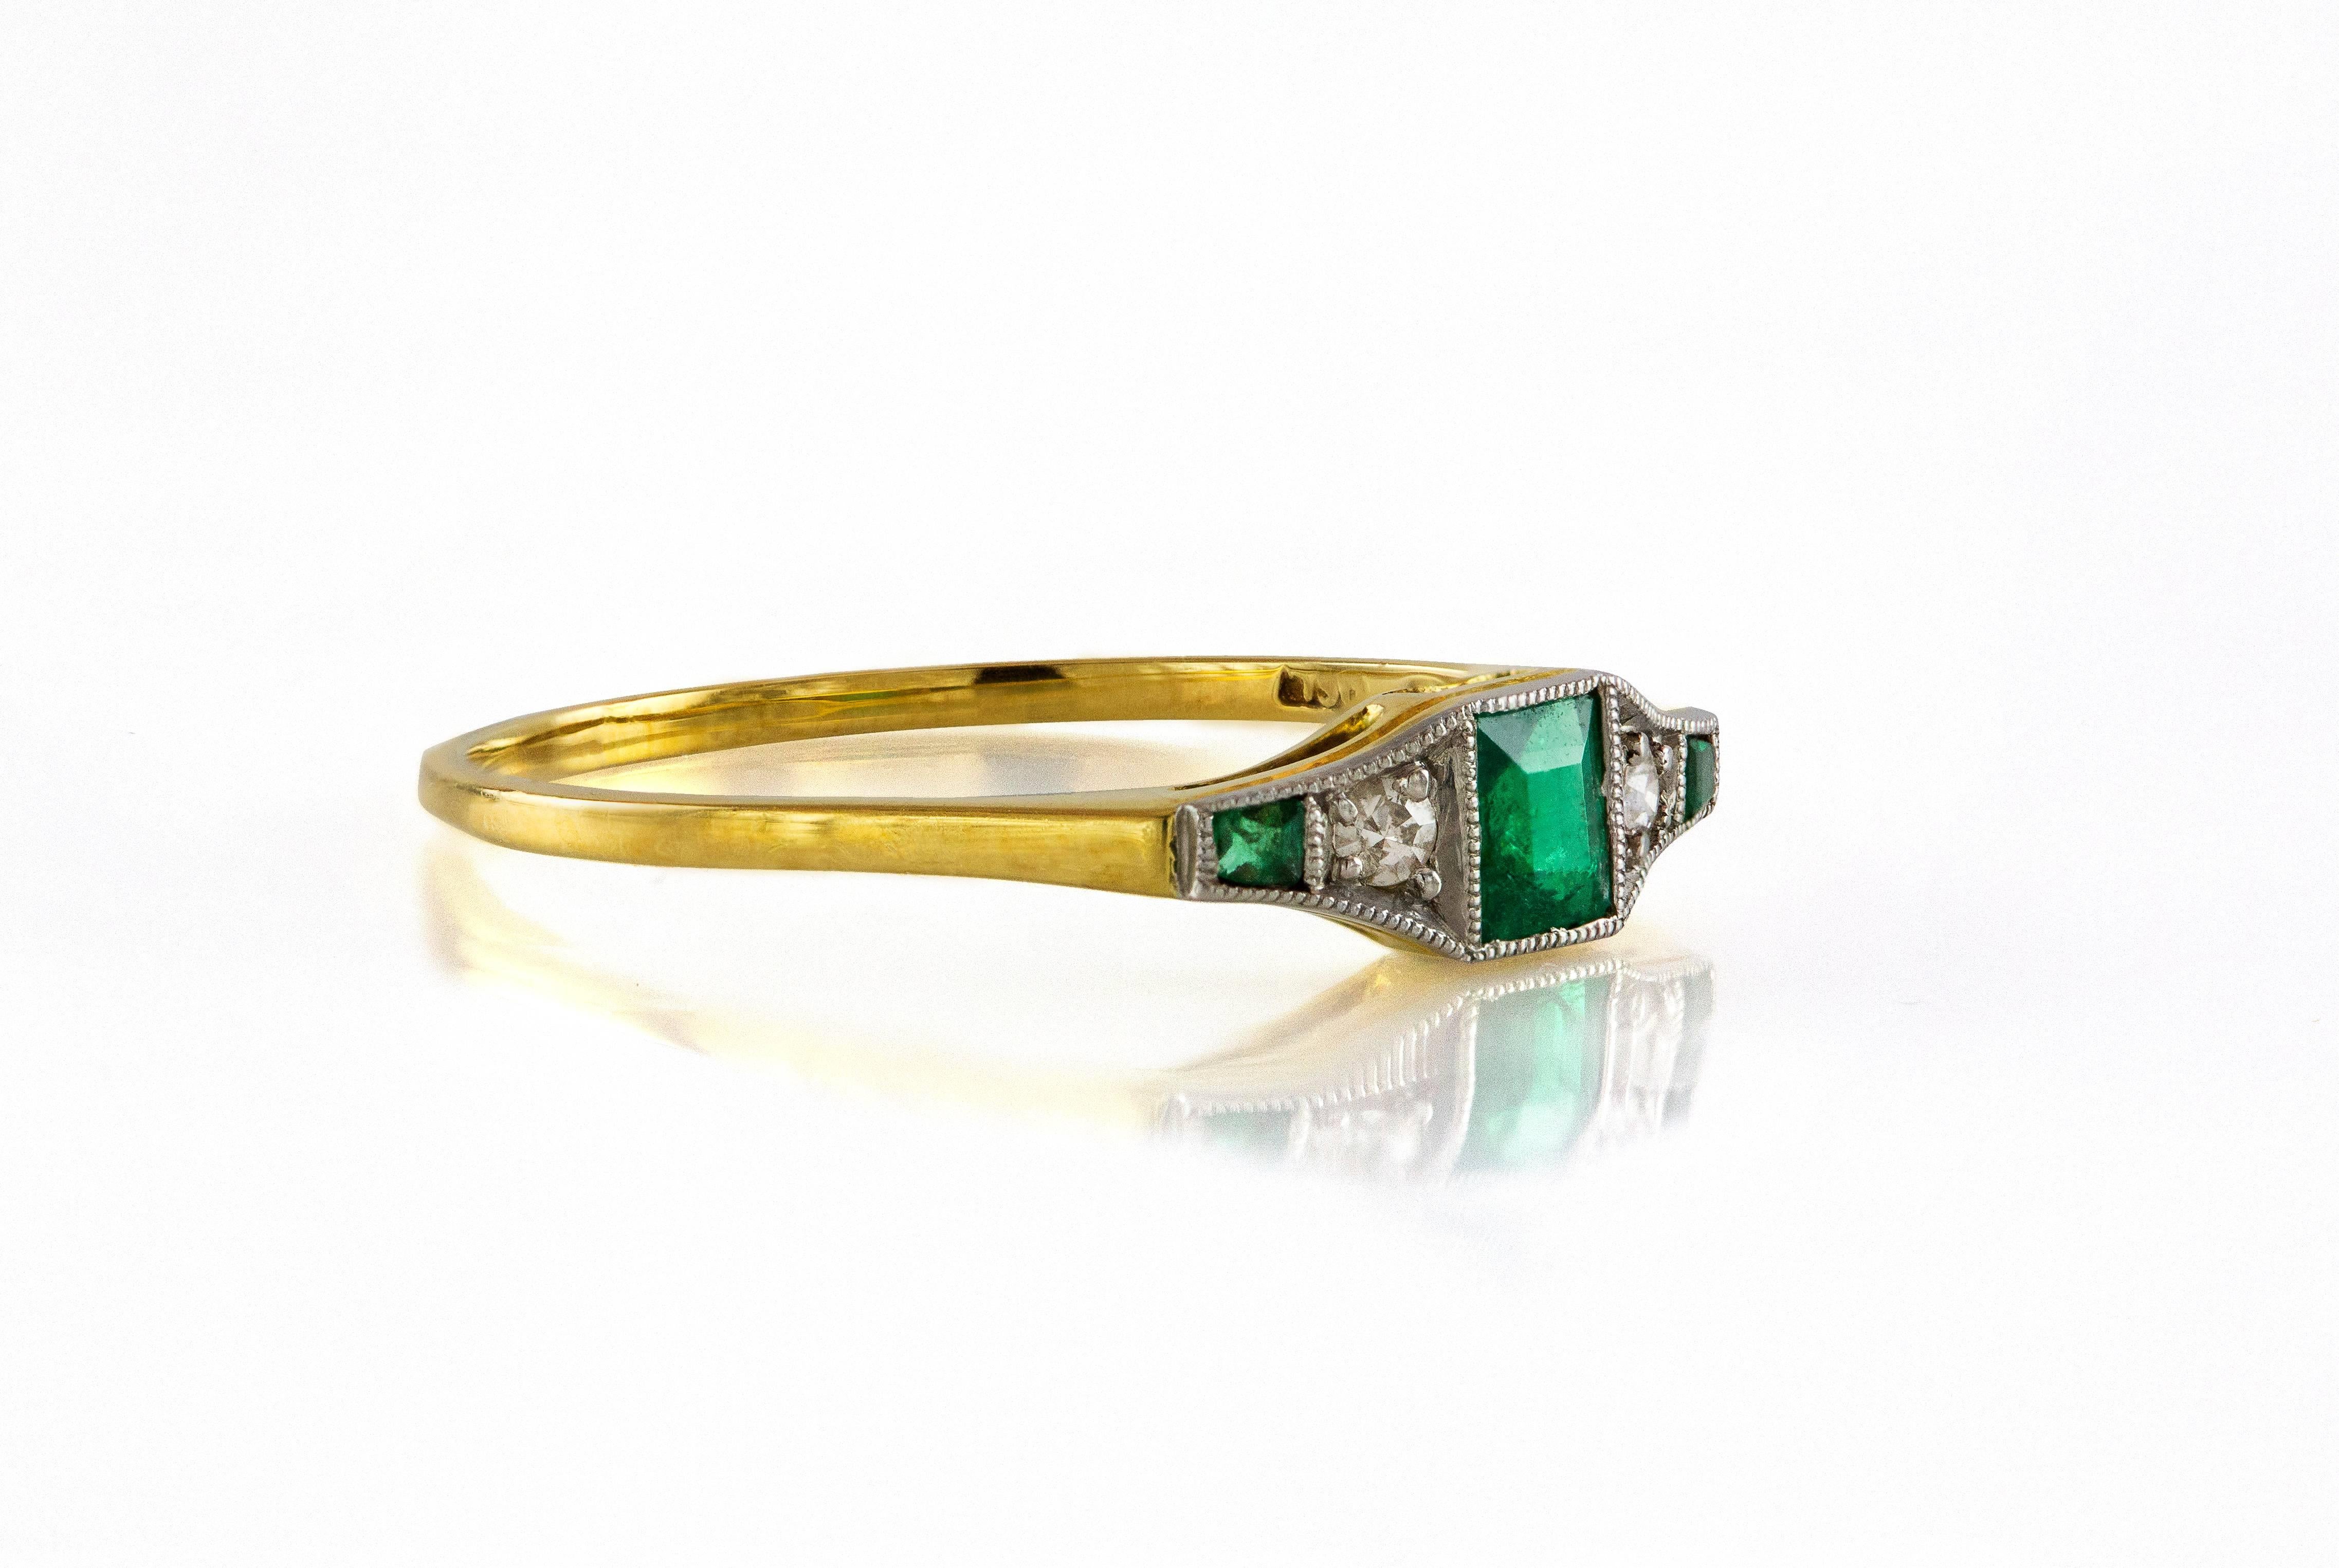 This antique ring features one square emerald in the center and 2 smaller tapered emeralds on each side separated by single cut diamonds. Total weight of emeralds is approximately 0.17 carat and total weight of diamonds is approximately 0.03 carat.